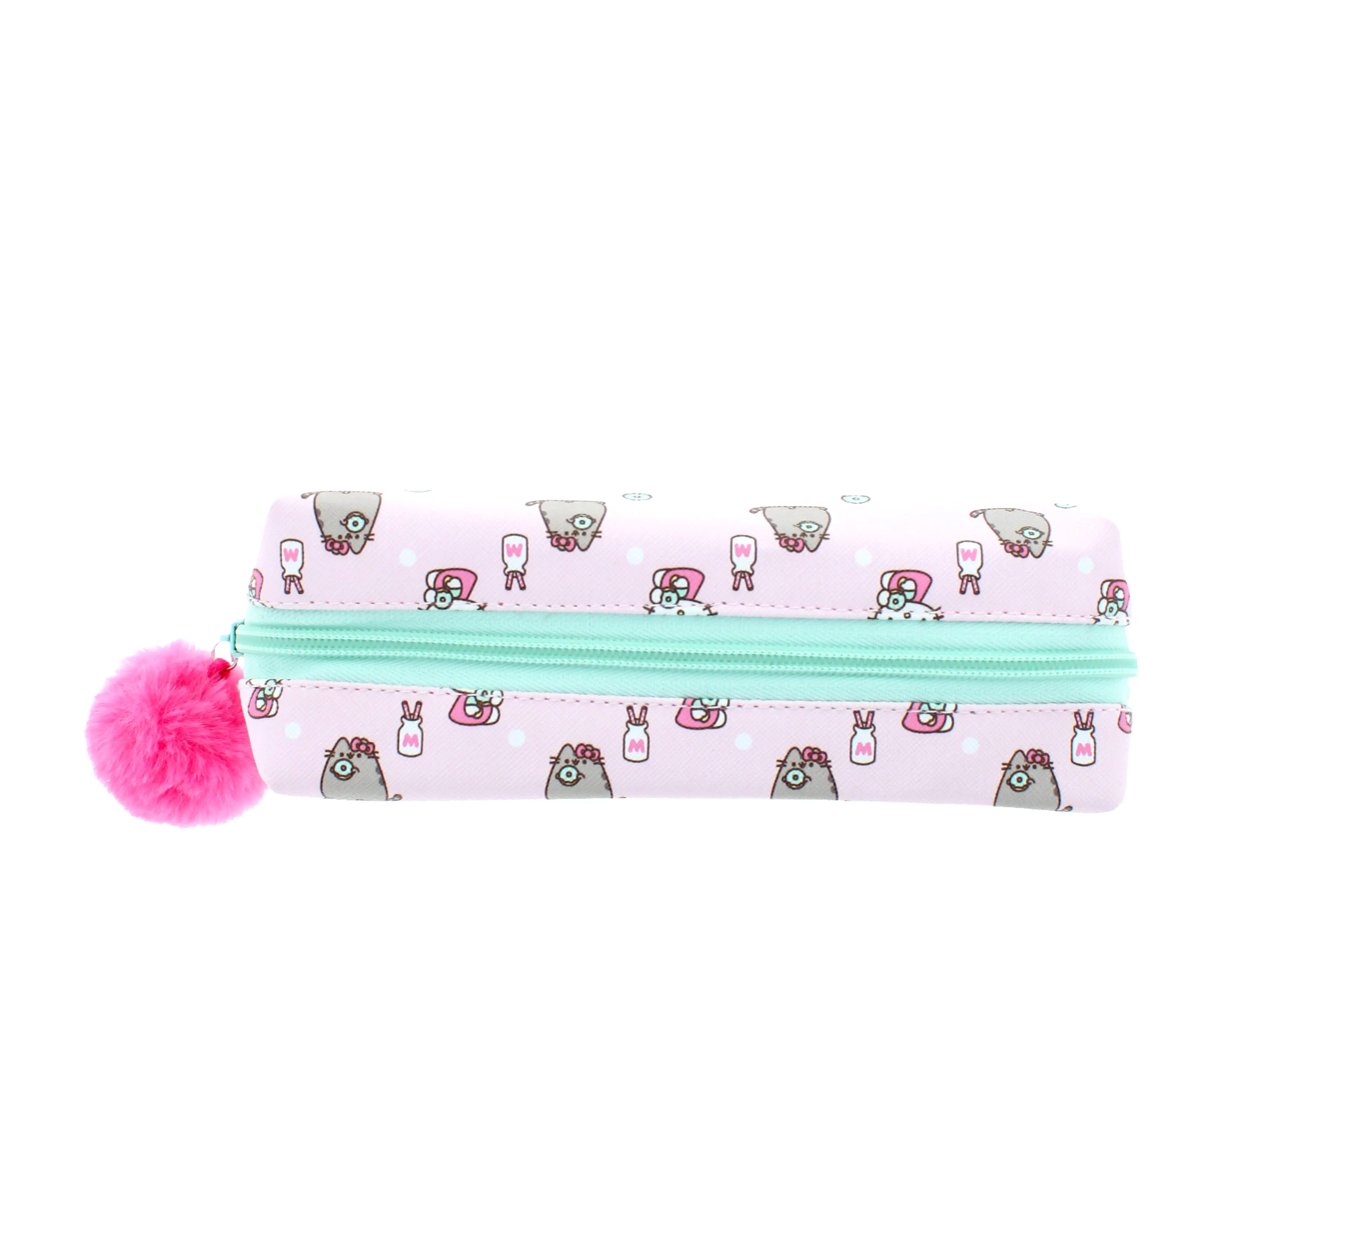 pencil case with pink pom-pom featuring hello kitty & pusheen showing top view with blue zip